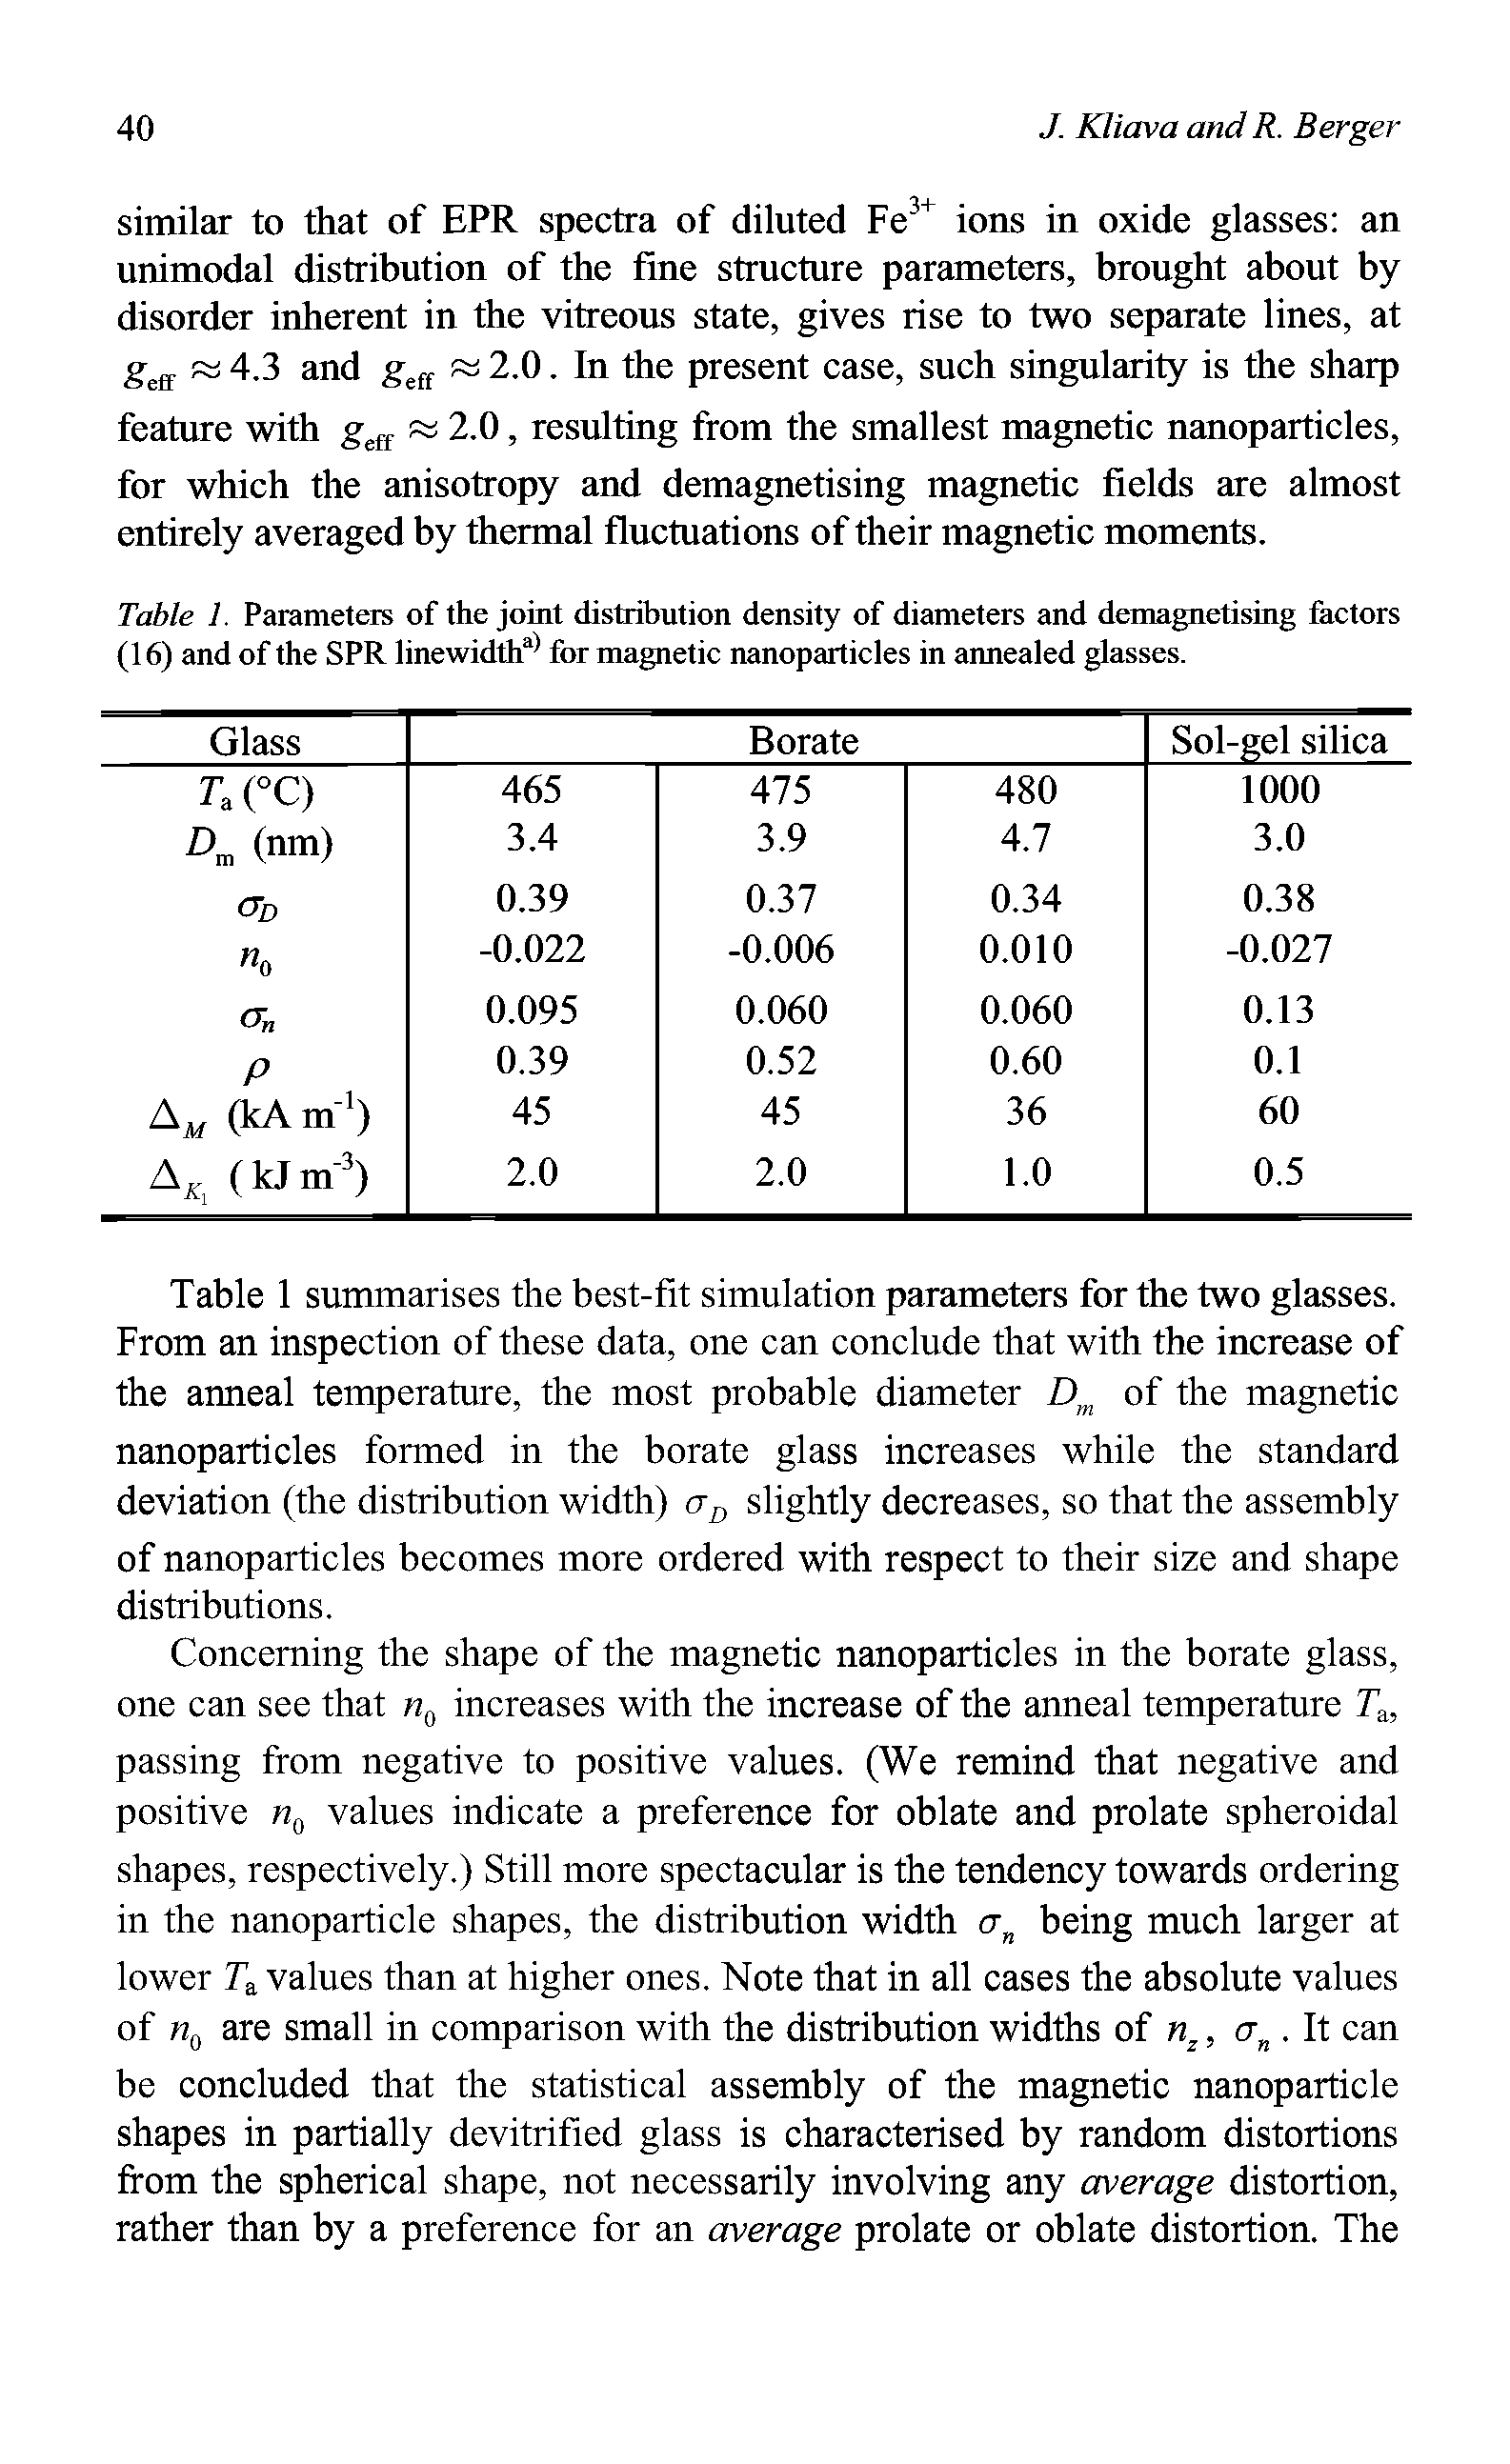 Table 1. Parameters of the joint distribution density of diameters and demagnetising factors (16) and of the SPR linewidtha) for magnetic nanoparticles in annealed glasses.